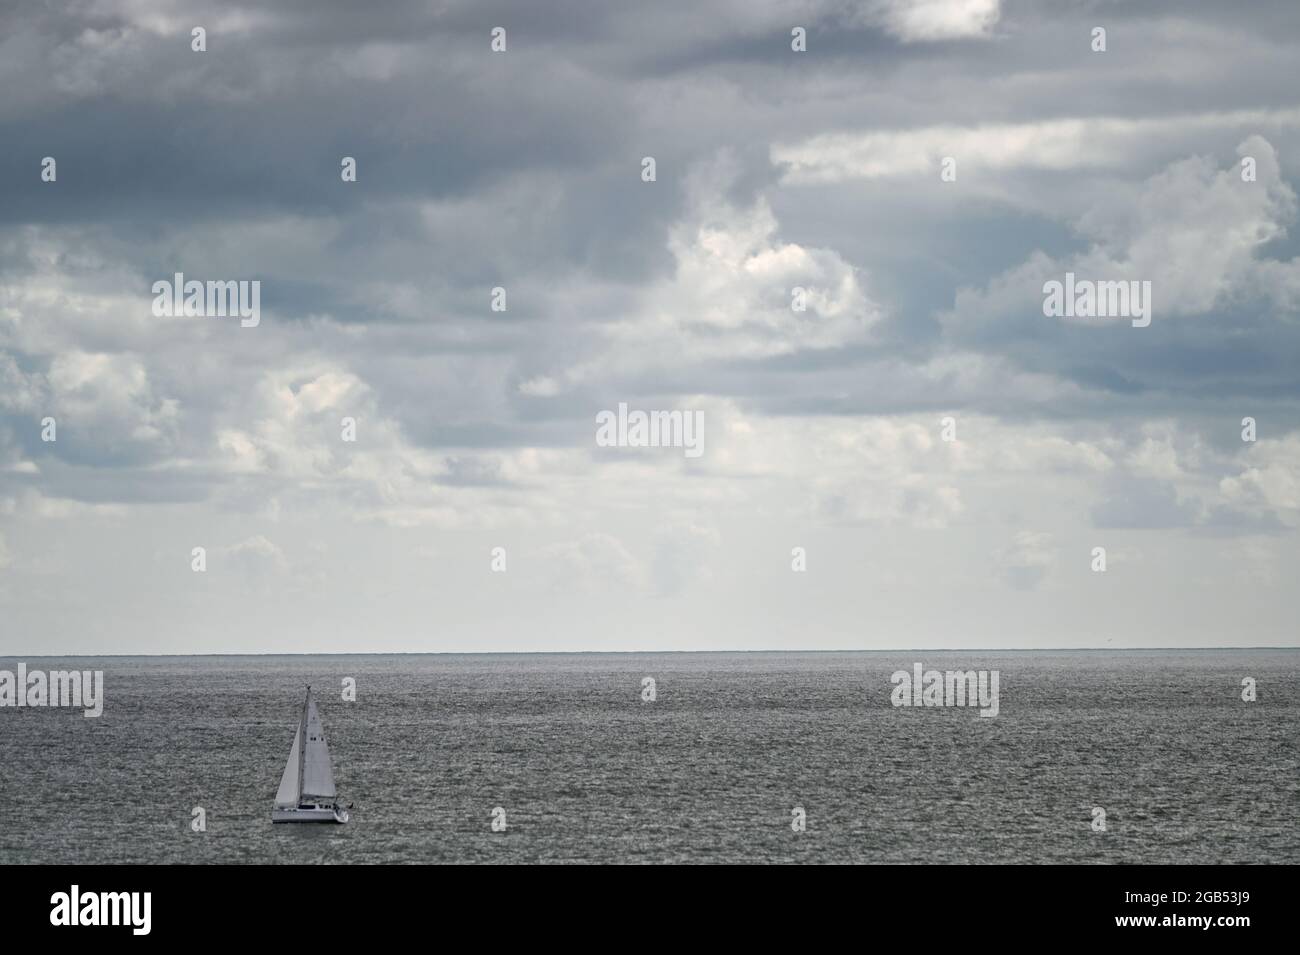 A single sail boat on the North Sea off the coast of Lowestoft, Suffolk, with storm clouds gathering about the sails Stock Photo